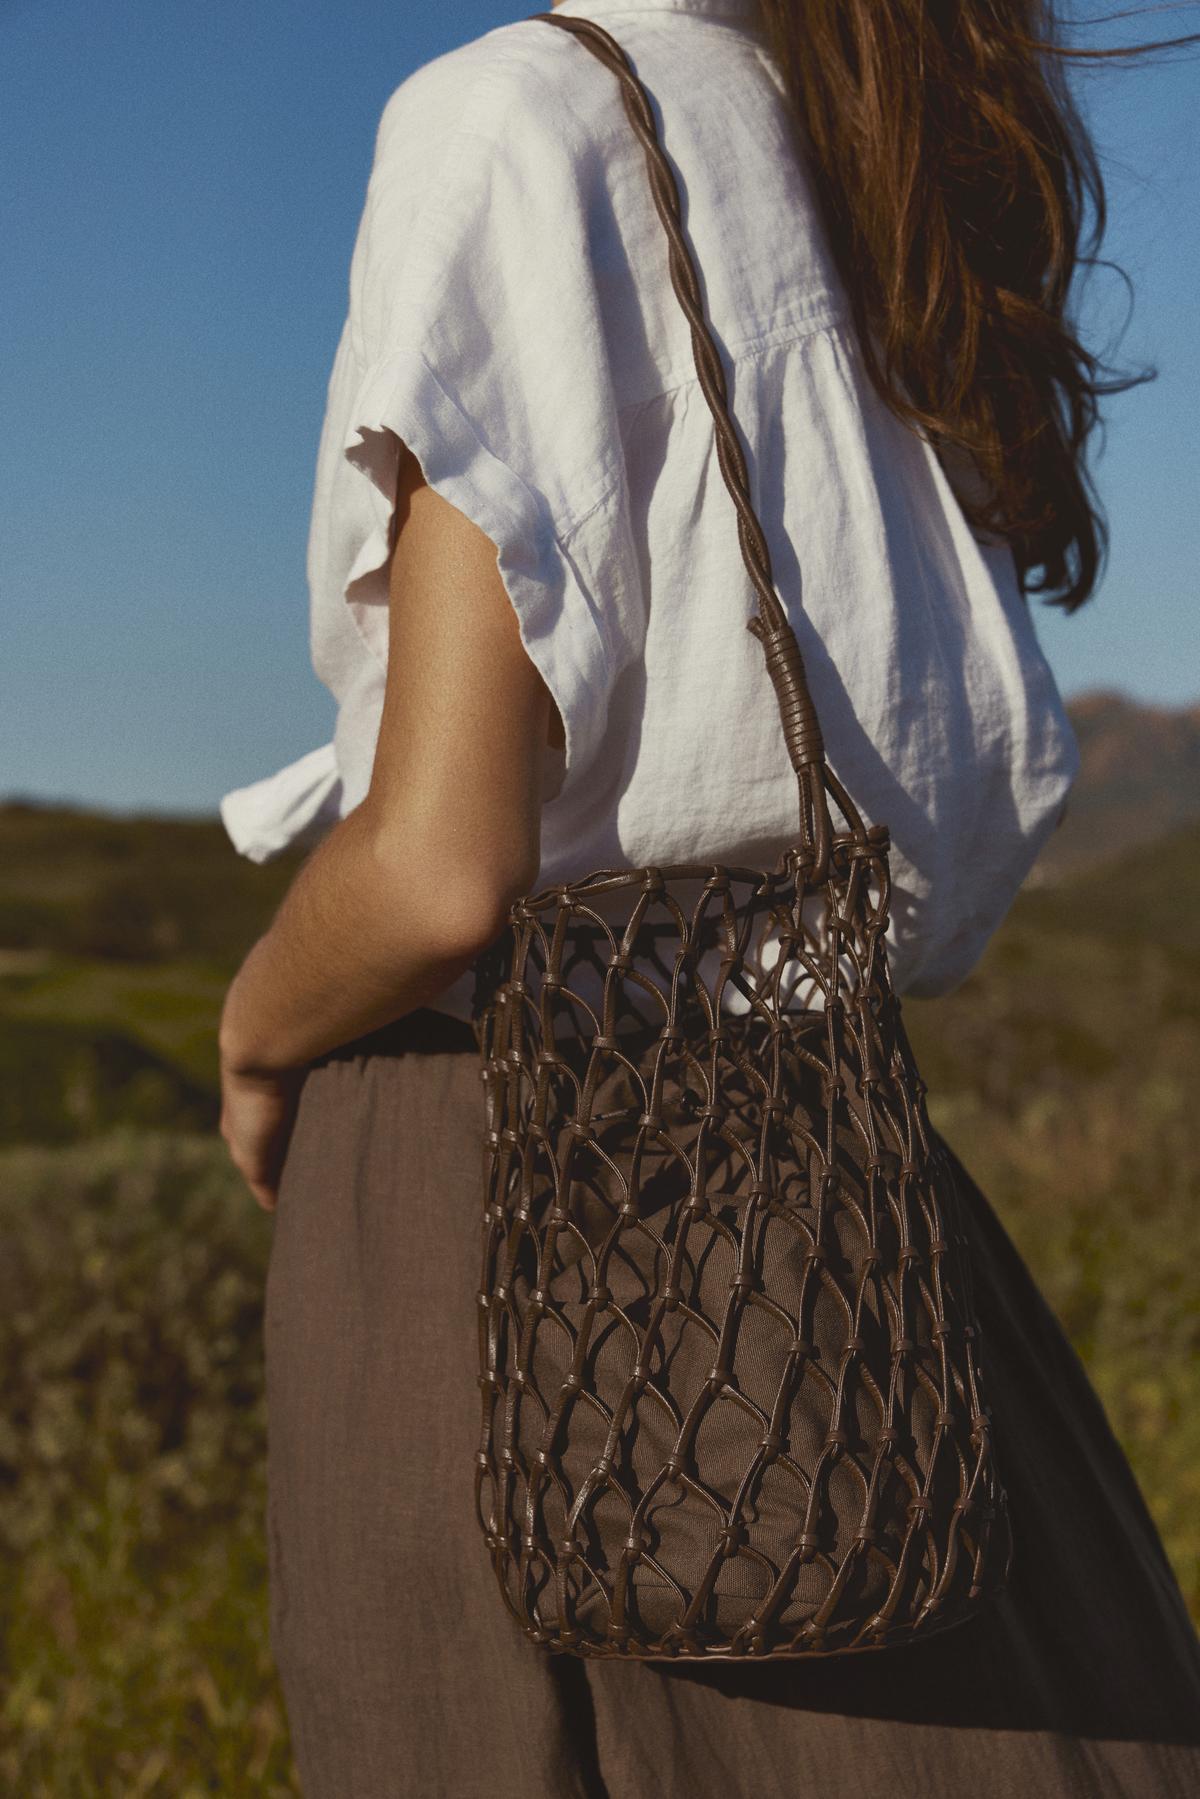 Woman in a white blouse and brown skirt holding a Velvet by Graham & Spencer mesh tote bag with a mesh design, standing in a field under clear skies.-36443449458881